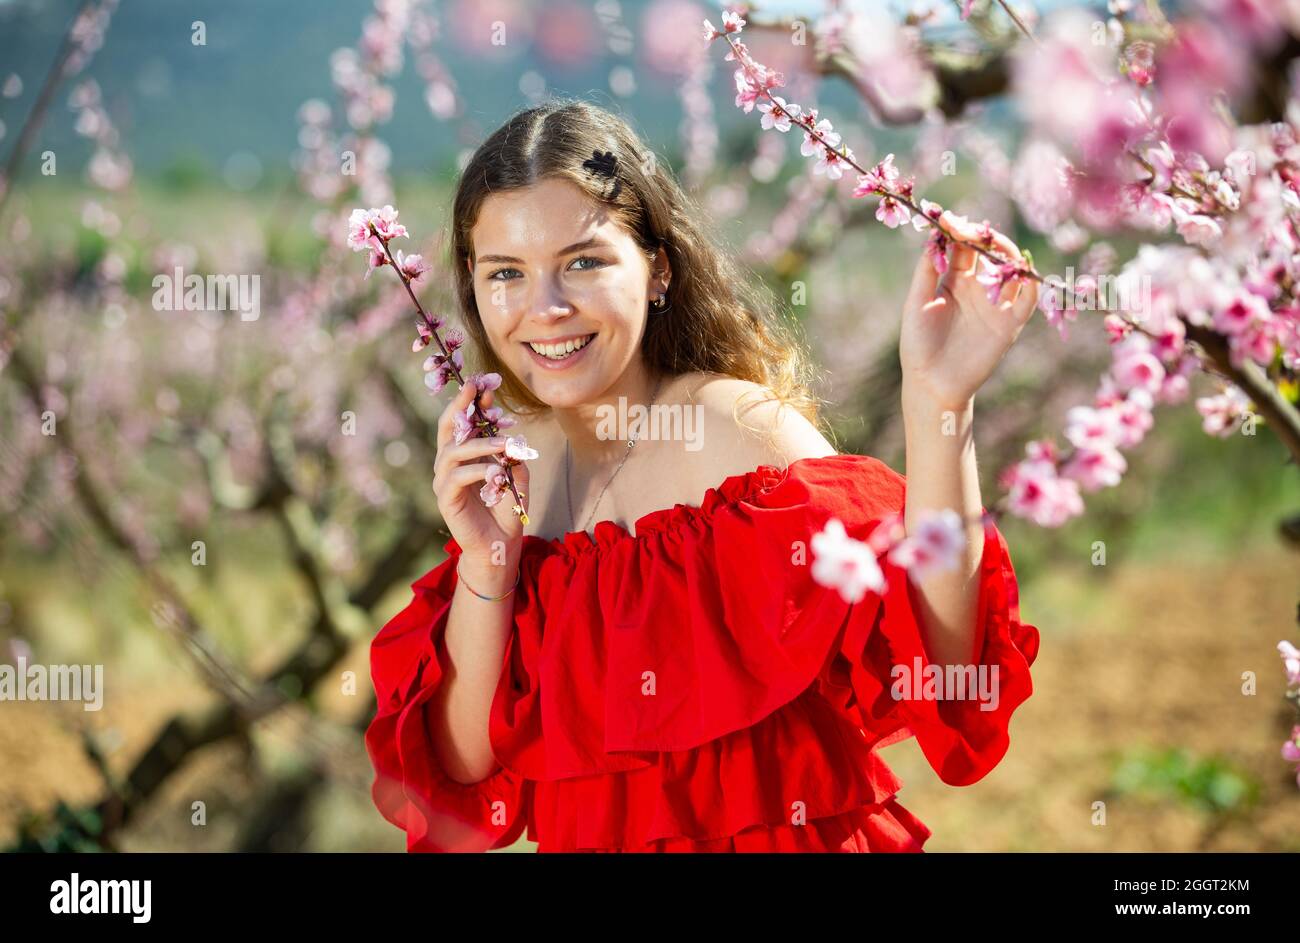 Woman in red dress standing near blooming peach tree Stock Photo